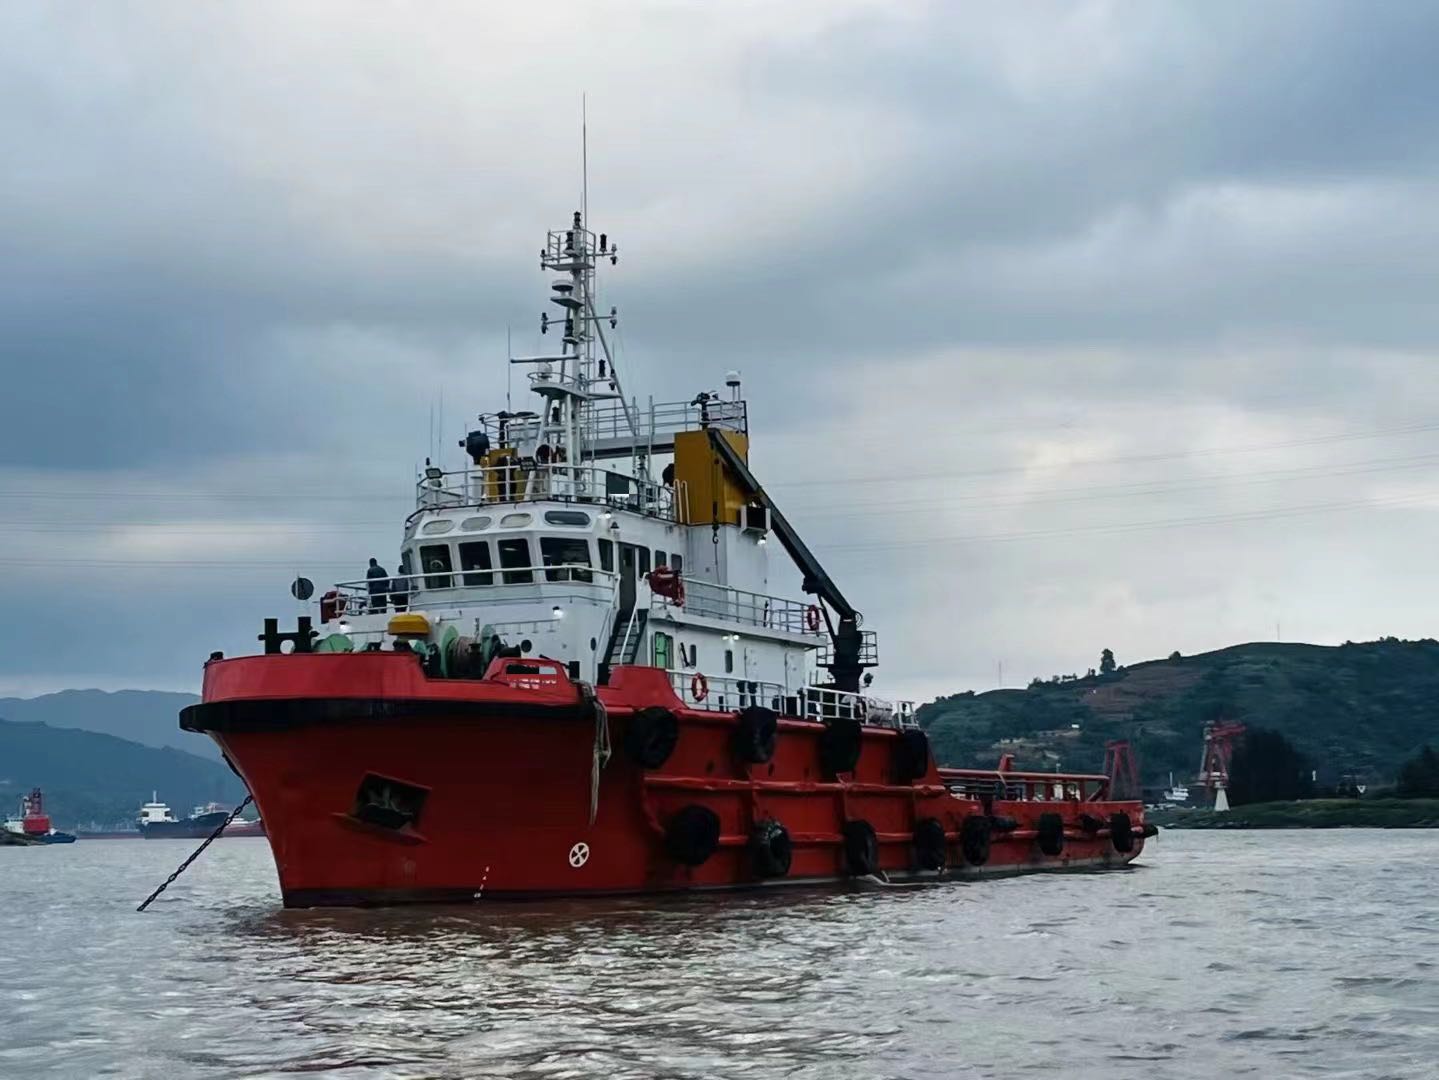 For sale: 4,000 horsepower ordinary tugboat, built in China in December 2010.